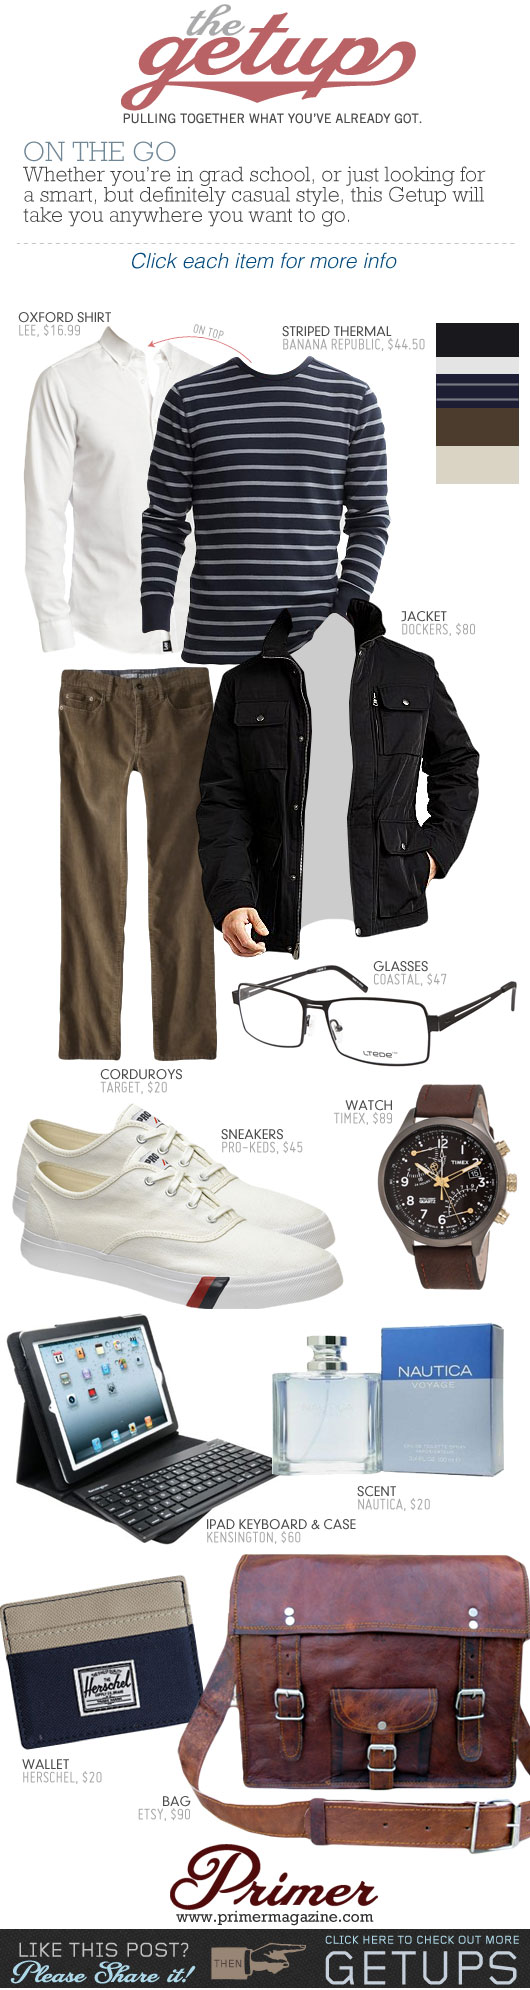 Getup On the Go - Black jacket, white sneakers, brown pants, striped shirt